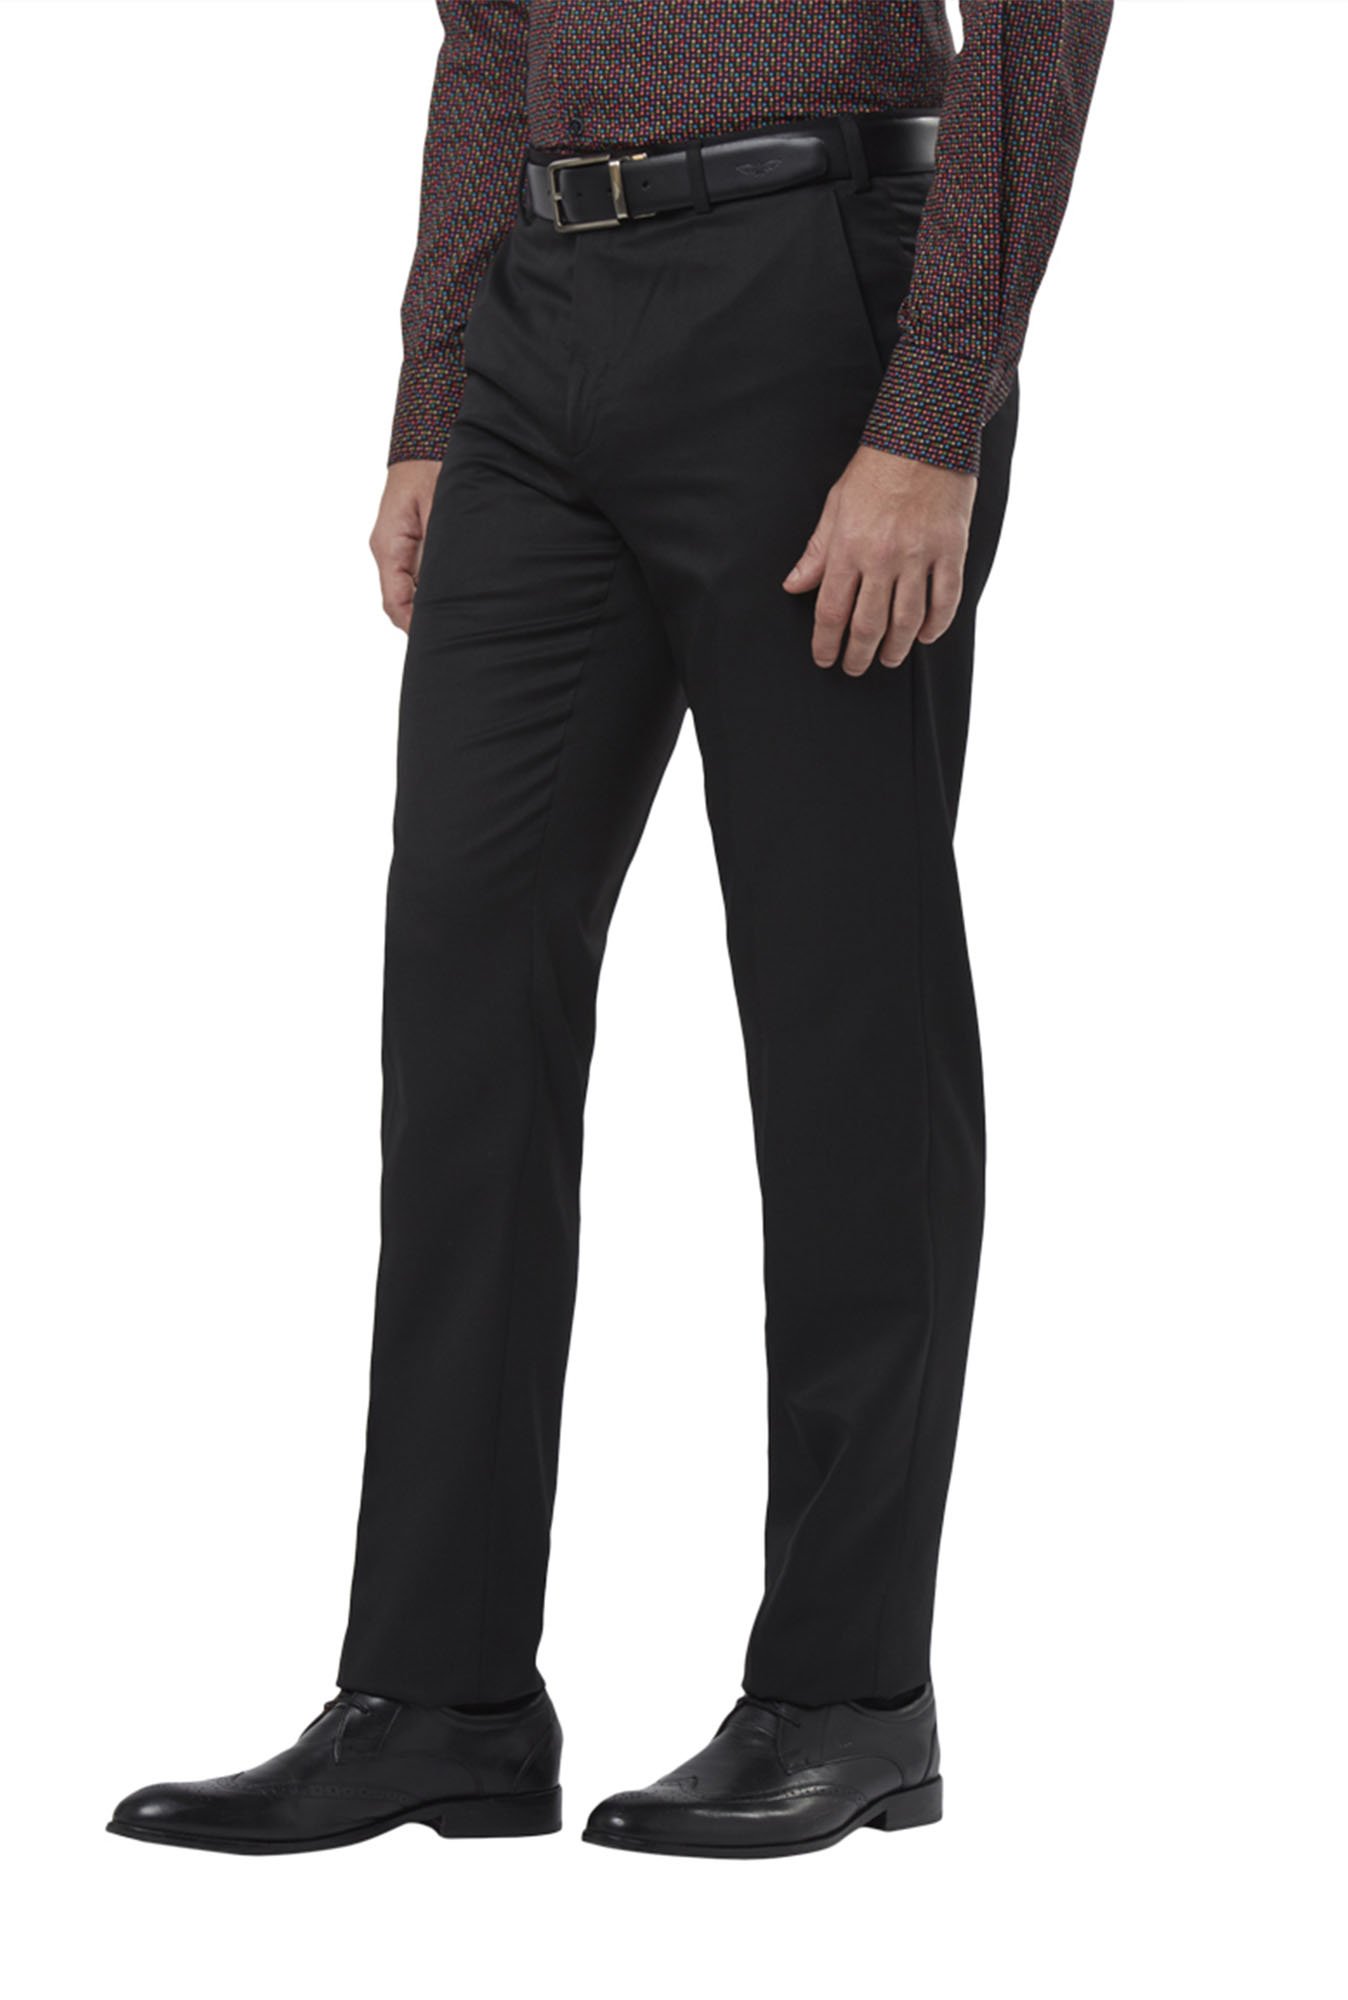 Buy RAYMOND Mens Printed Formal Trousers  Shoppers Stop